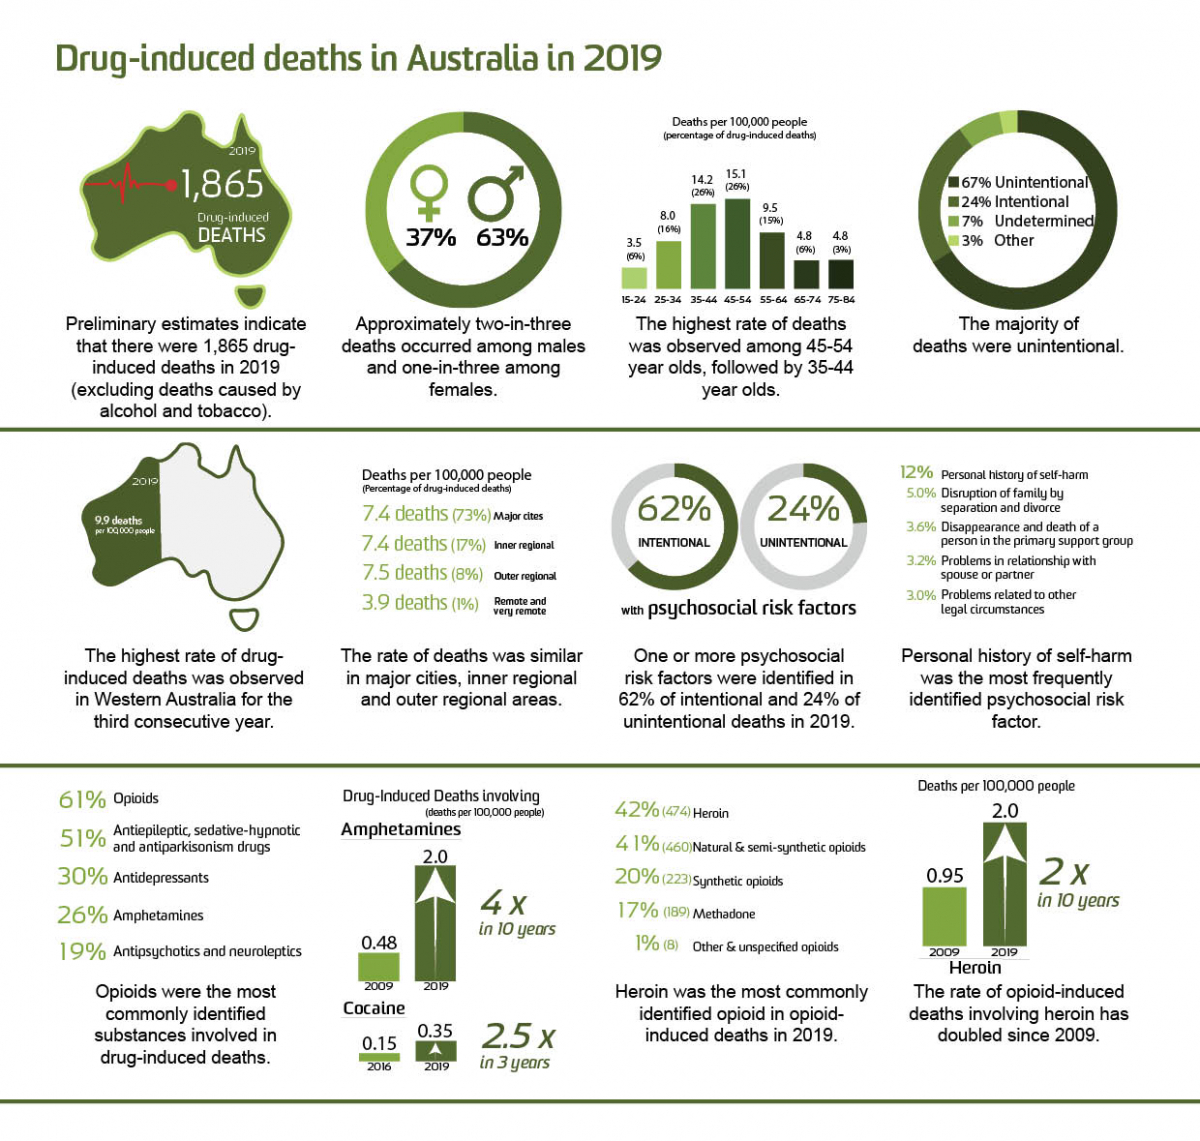 image - Trends in Drug-Induced Deaths in Australia, 1997-2019